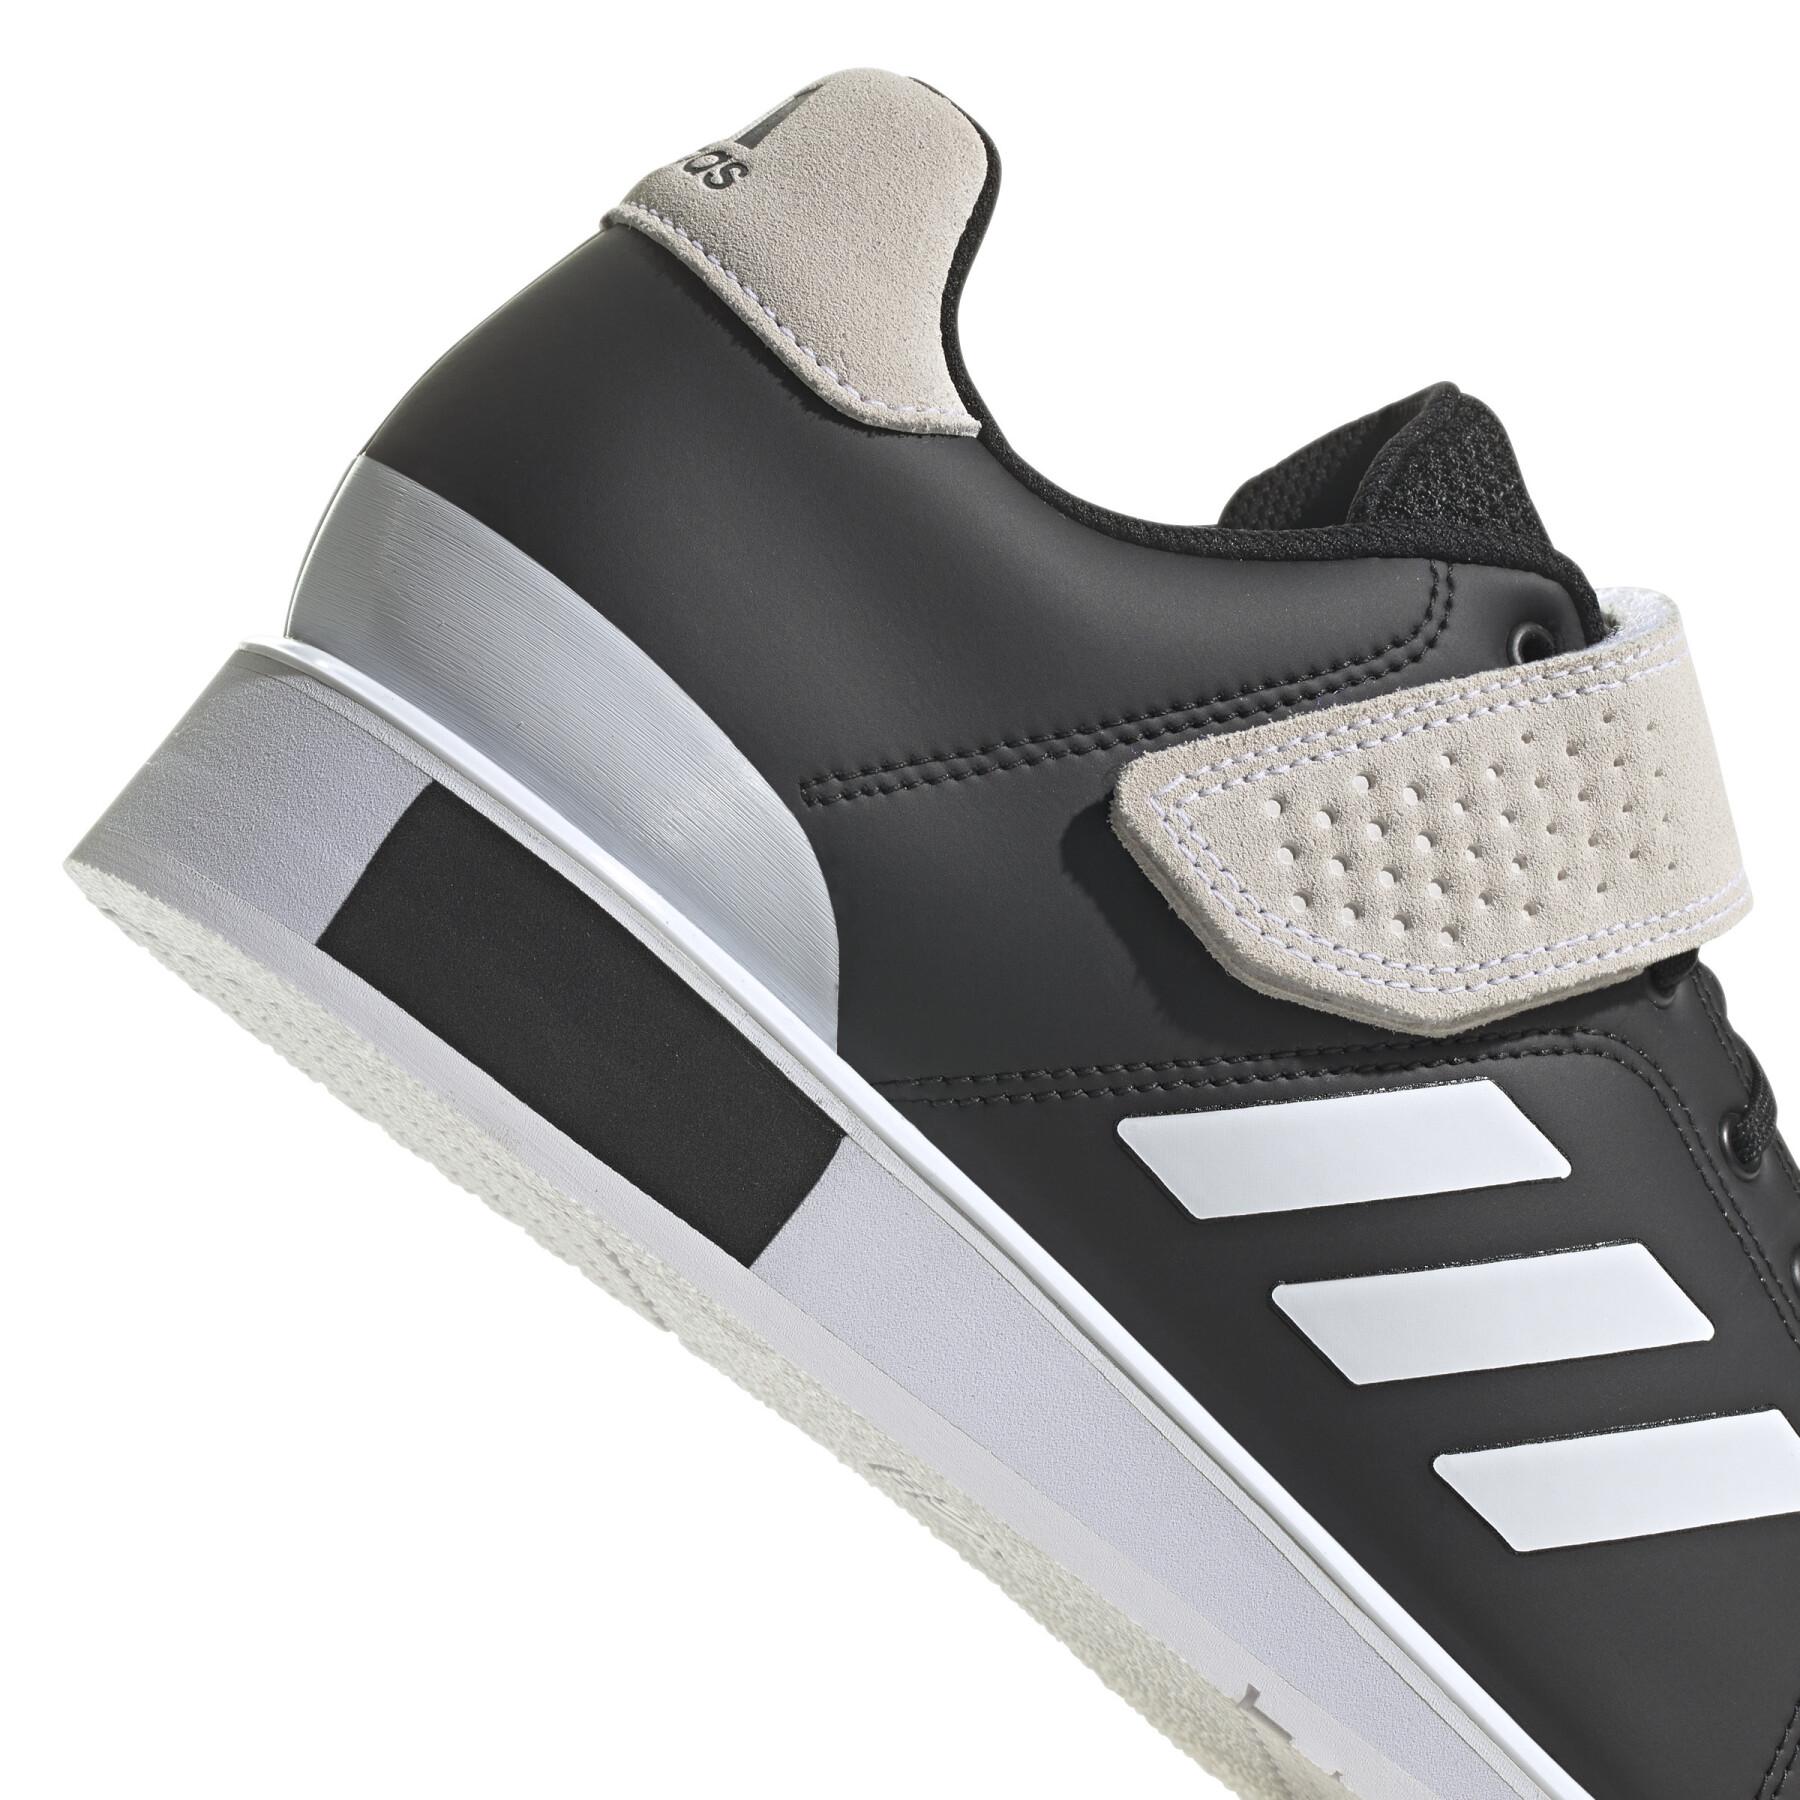 Chaussures adidas Power Perfect III